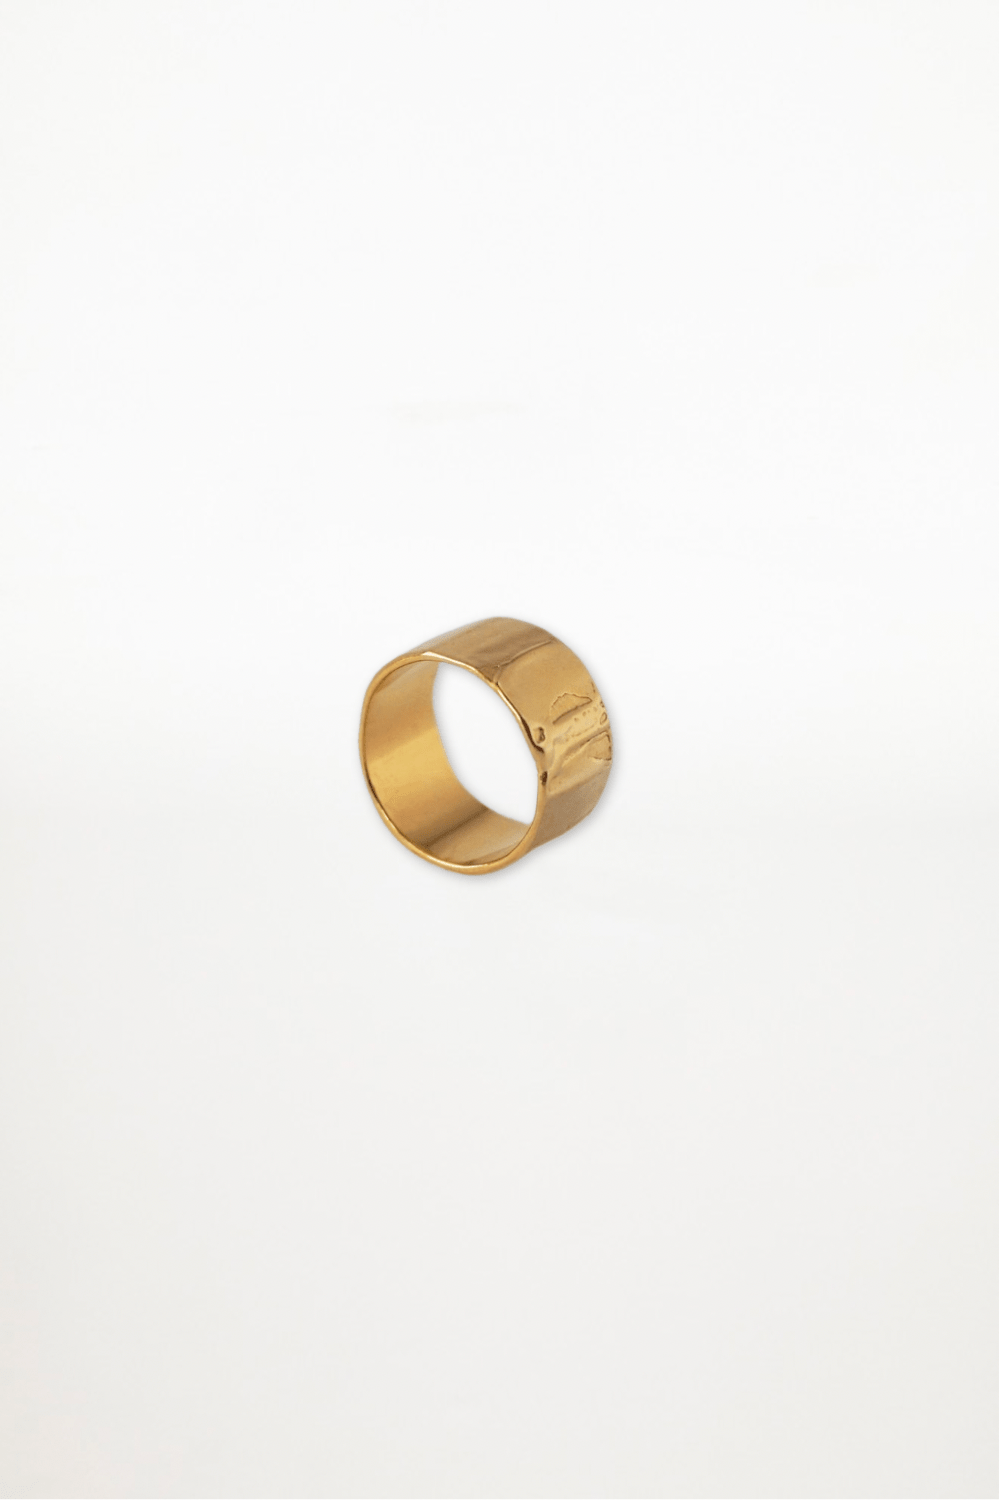 Lilly Buttrose - Pleated Ring - Gold - Ensemble Studios